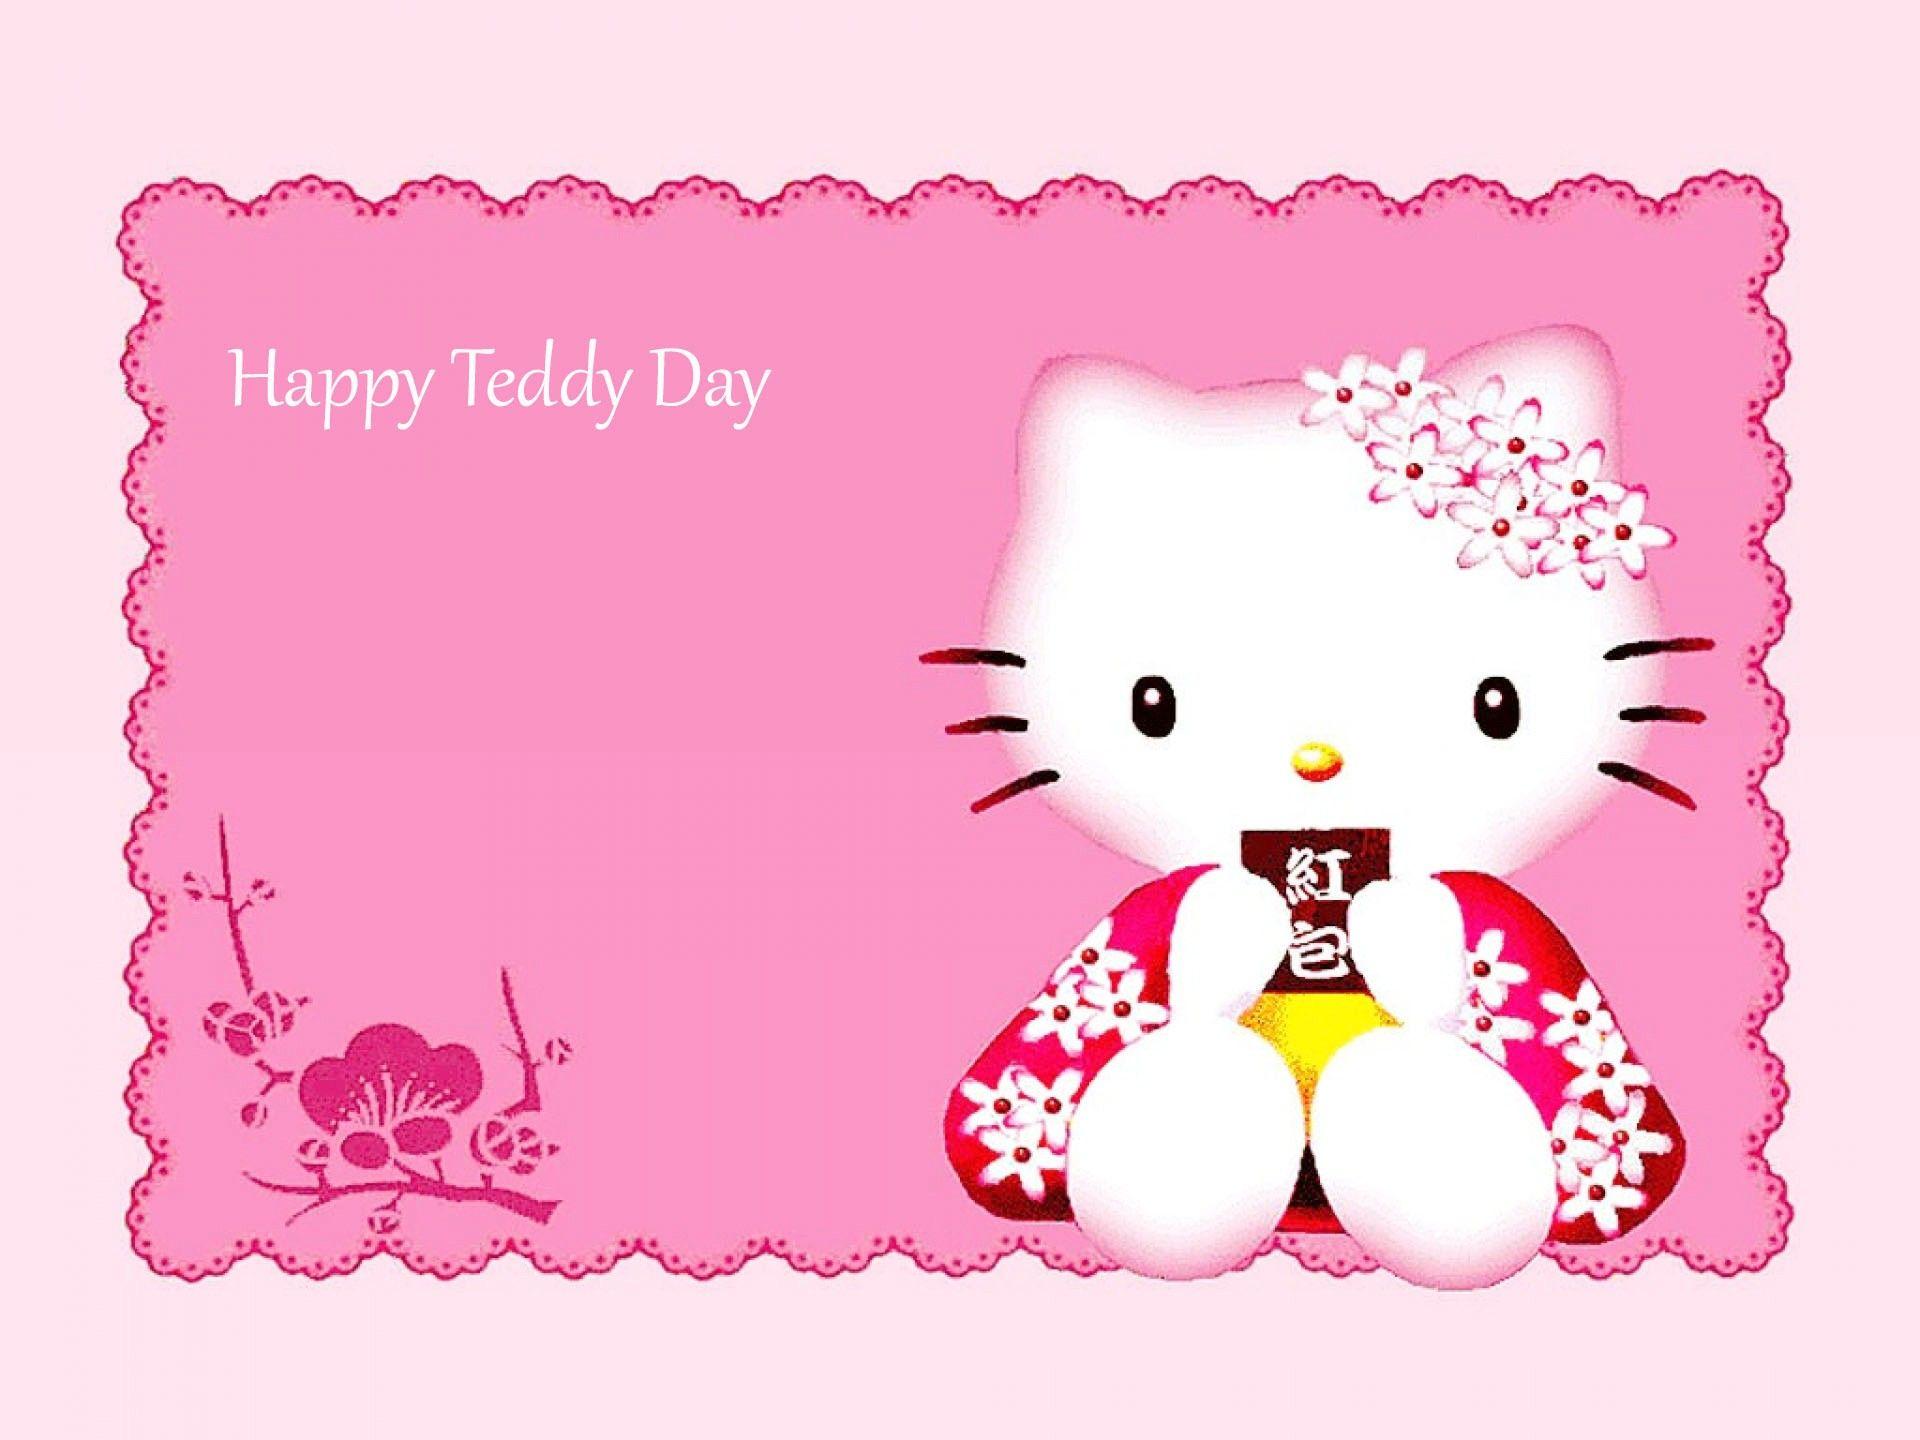 Happy Teddy Day HD Wallpaper, Wishes Photo Free